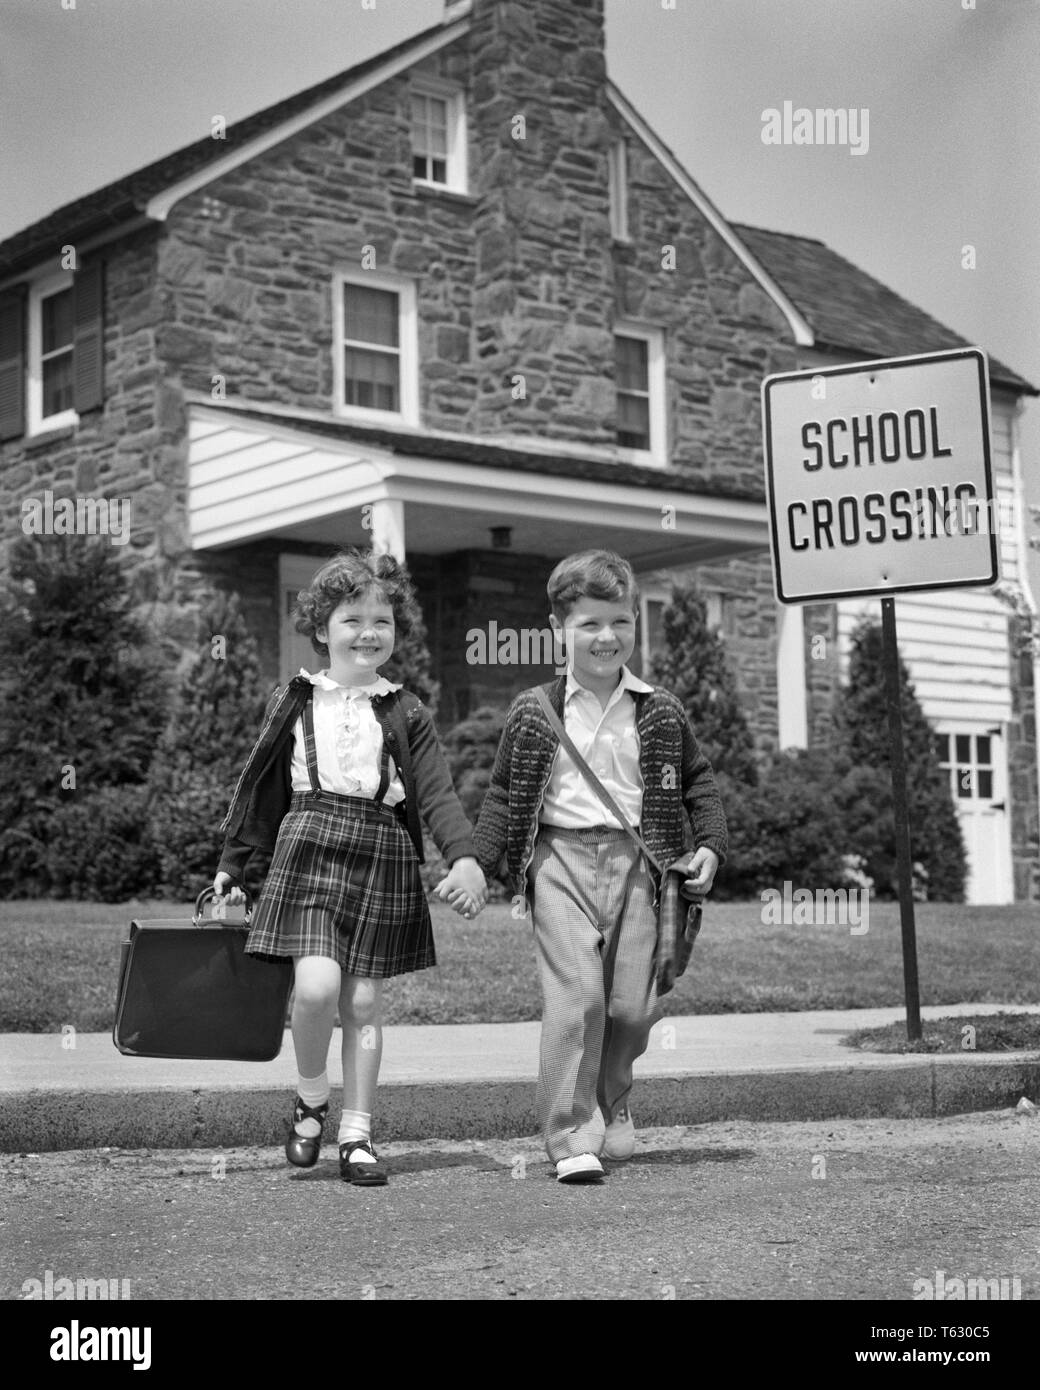 1950s YOUNG ELEMENTARY AGE BOY AND GIRL WITH BOOK BAGS HOLDING HANDS WALKING TOGETHER CROSSING SUBURBAN STREET GOING TO SCHOOL - s107 HAR001 HARS GOING AGE EXPRESSION OLD TIME NOSTALGIA BROTHER CROSS CROSSING OLD FASHION SISTER JUVENILE ELEMENTARY FACIAL STYLE FEAR SECURITY SAFETY TEAMWORK PLEASED JOY LIFESTYLE FEMALES BROTHERS HEALTHINESS HOME LIFE COPY SPACE FULL-LENGTH DANGER MALES SIBLINGS CONFIDENCE SISTERS EXPRESSIONS B&W SCHOOLS GRADE HAPPINESS CHEERFUL ADVENTURE STRATEGY AND EXCITEMENT MARY JANE TO PLAID SKIRT PRIMARY SIBLING SMILES CONCEPTUAL JOYFUL STYLISH K-12 CAUTION GRADE SCHOOL Stock Photo